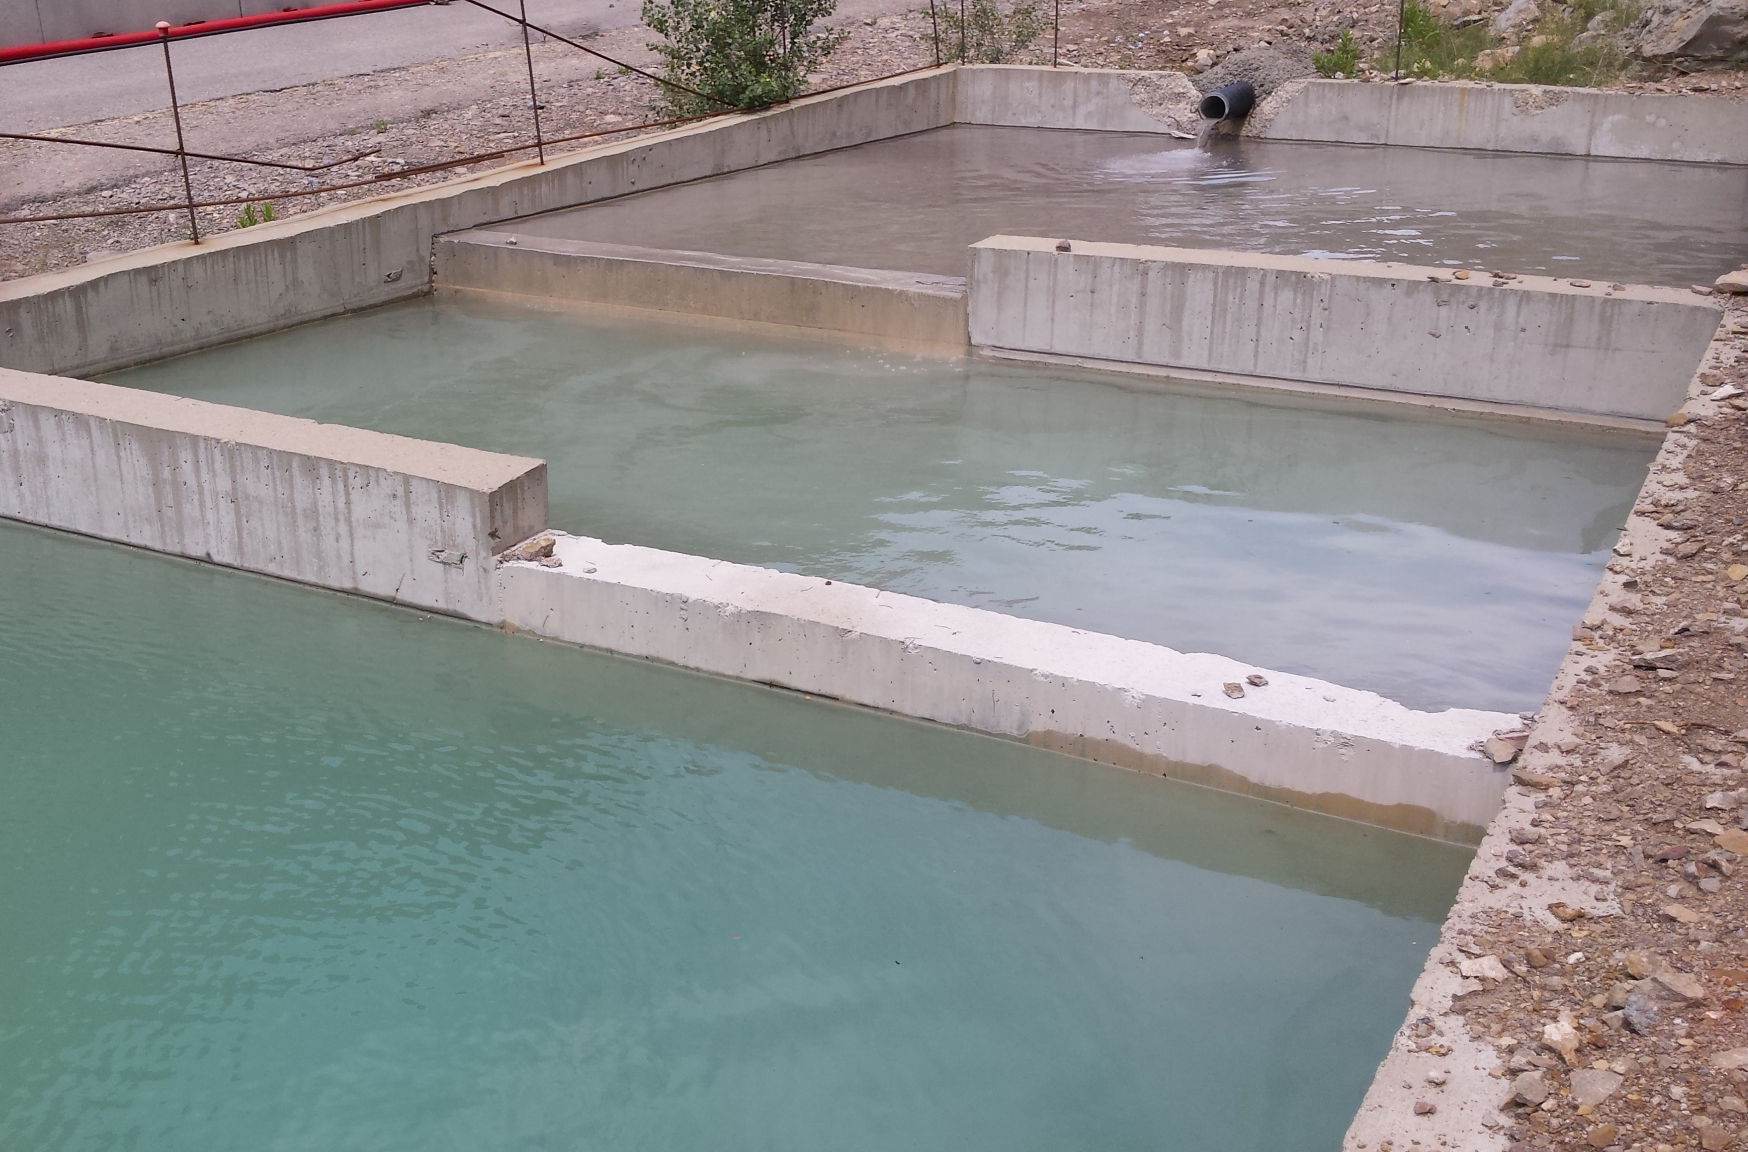 The use of these ponds makes it possible for suspended solids to be deposited before the water is discharged into the river